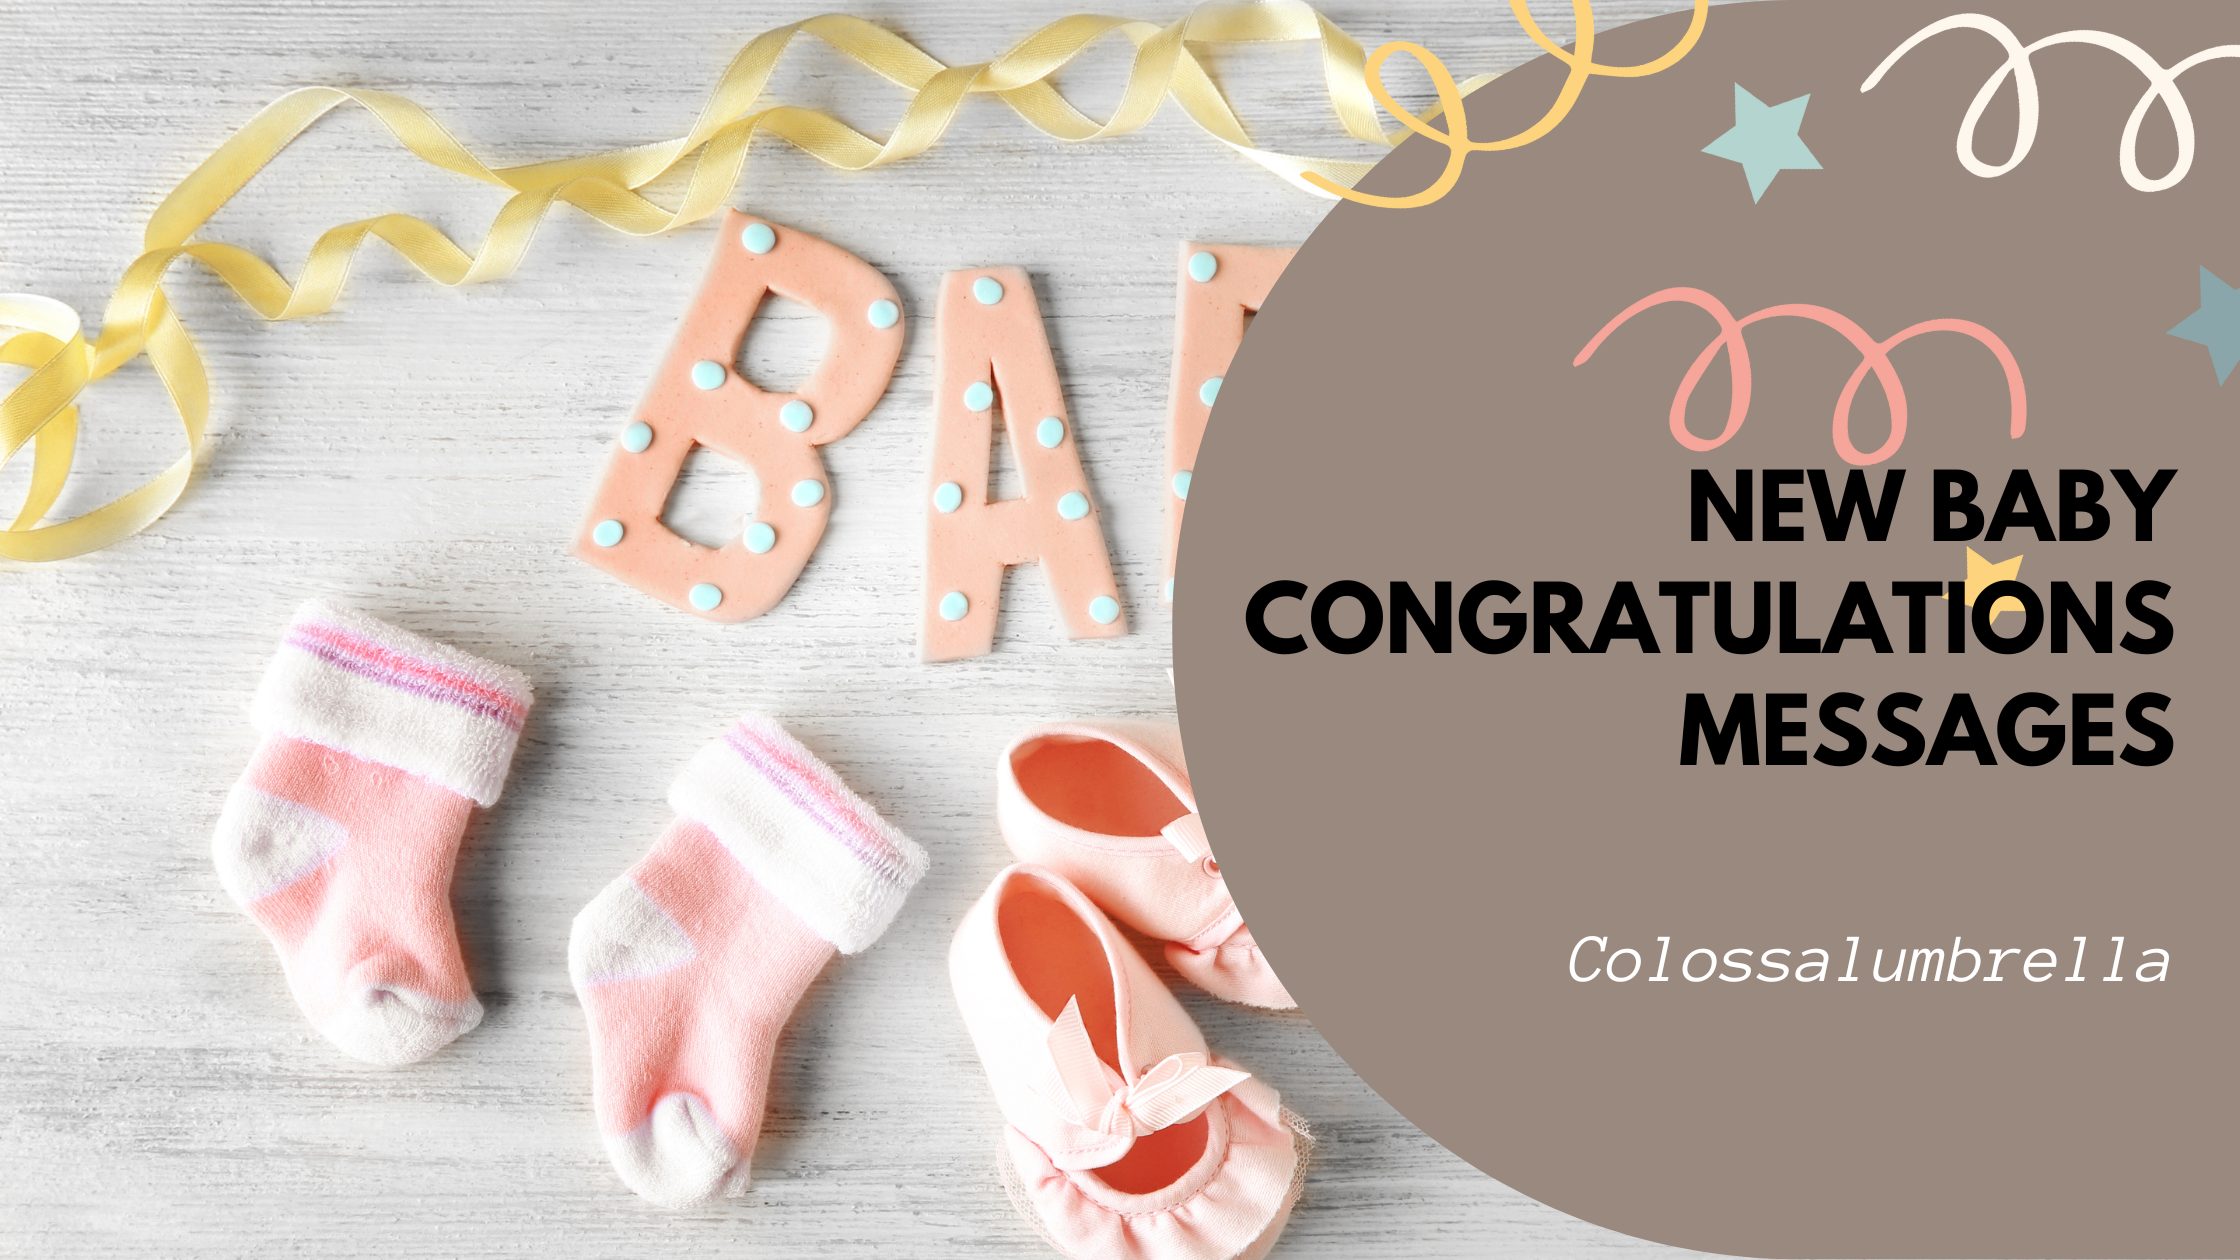 New Baby Congratulations Messages by Colossalumbrella